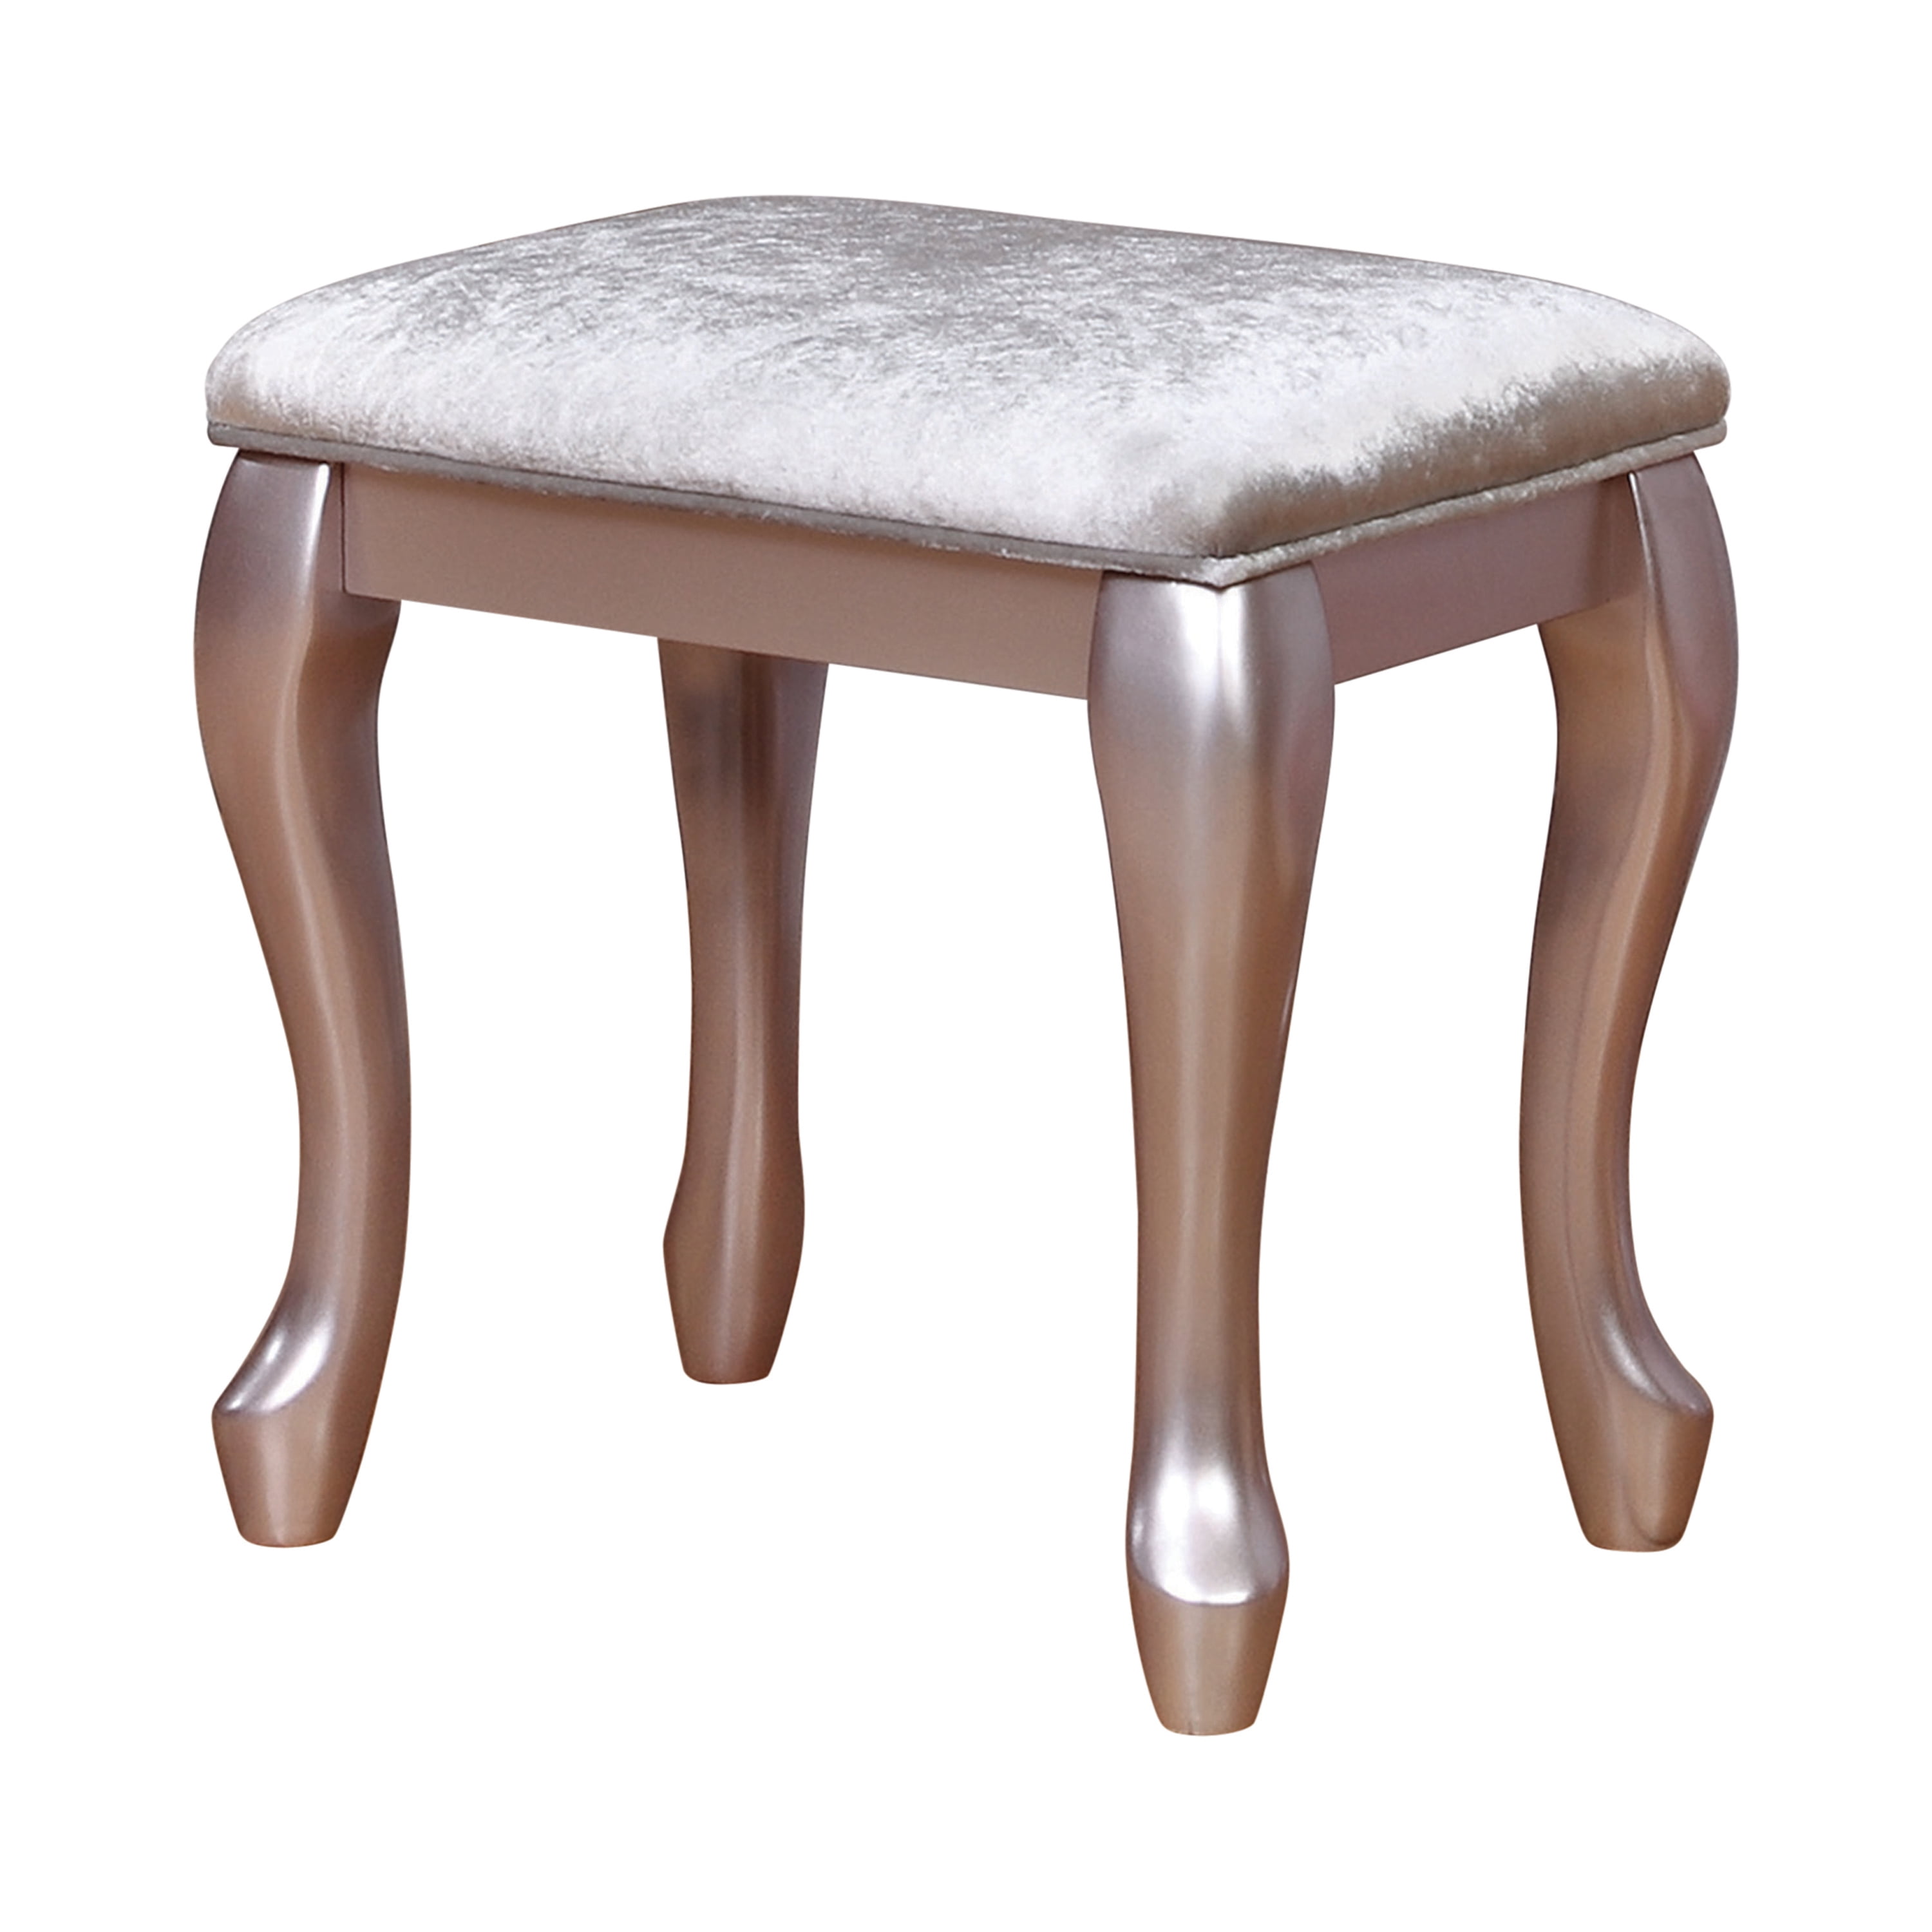 Polly Tufted Round Vanity Stool Pleated, Vanity Stool With Skirt